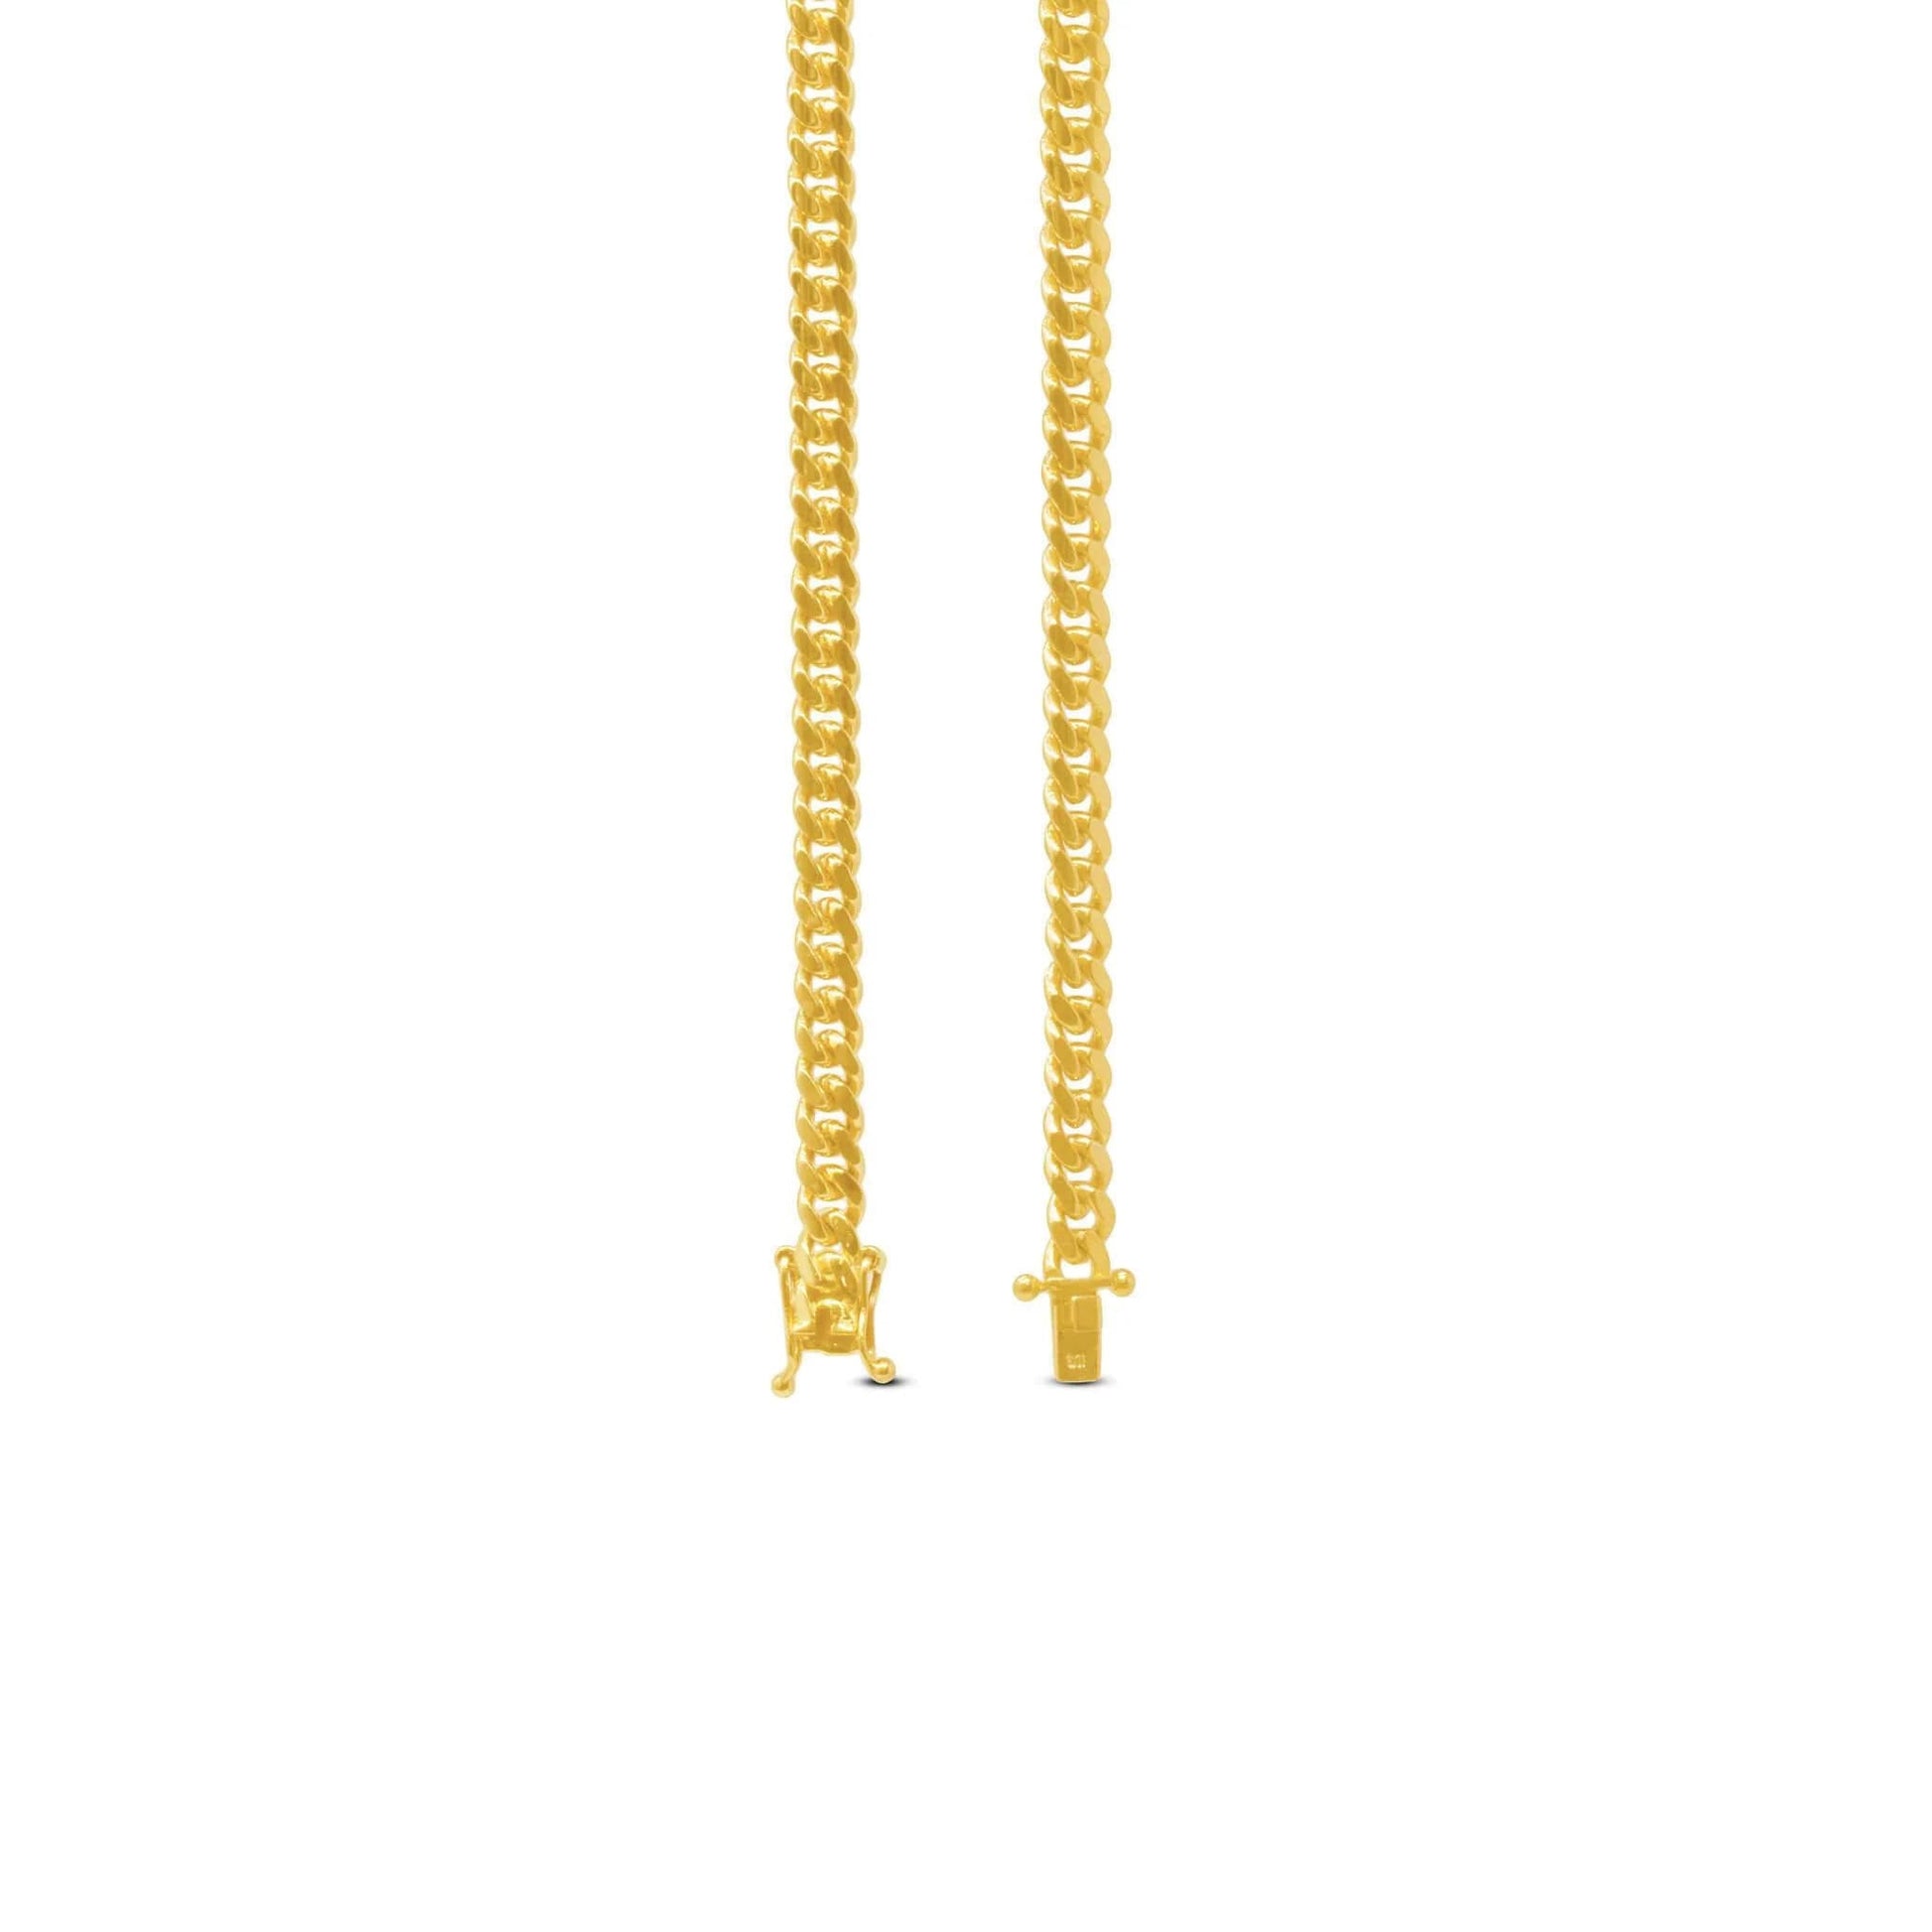 20mm Miami Cuban Link Bracelet in 10K Solid Yellow Gold - Vera Jewelry in Miami